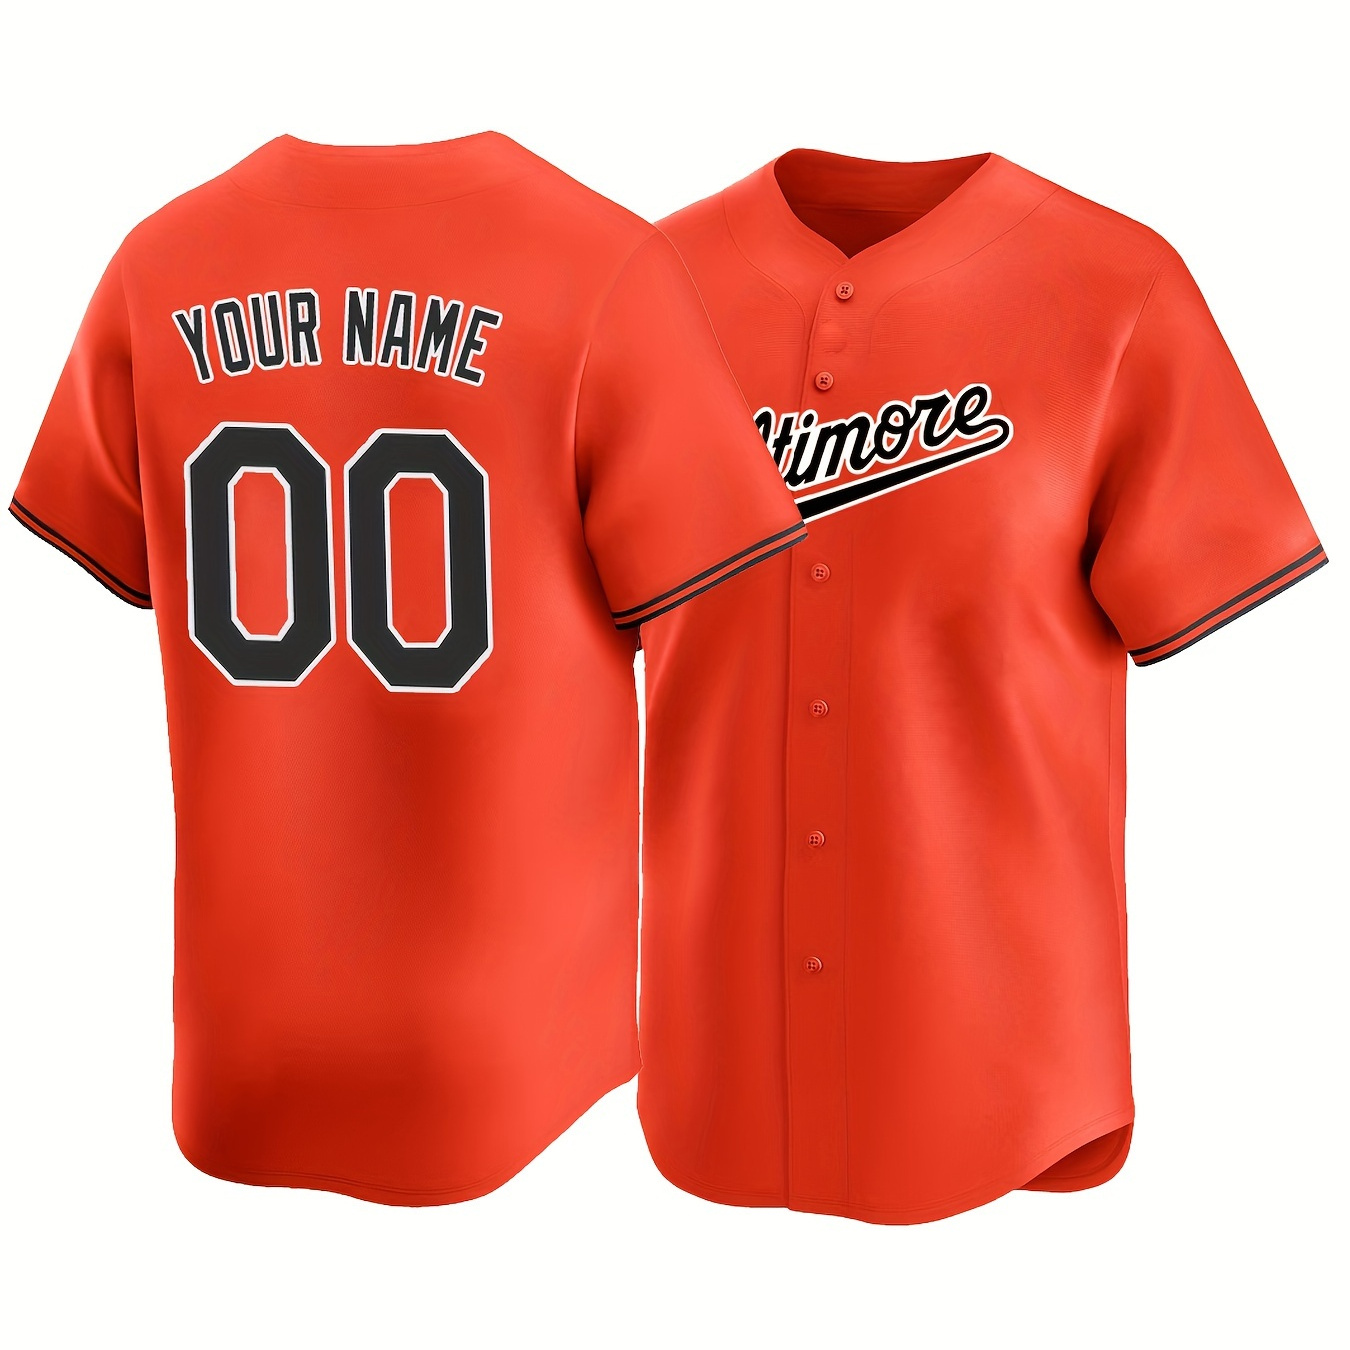 

Customized Name And Number, Men's Solid Color Baseball Jersey, Comfy Top For Training And Competition